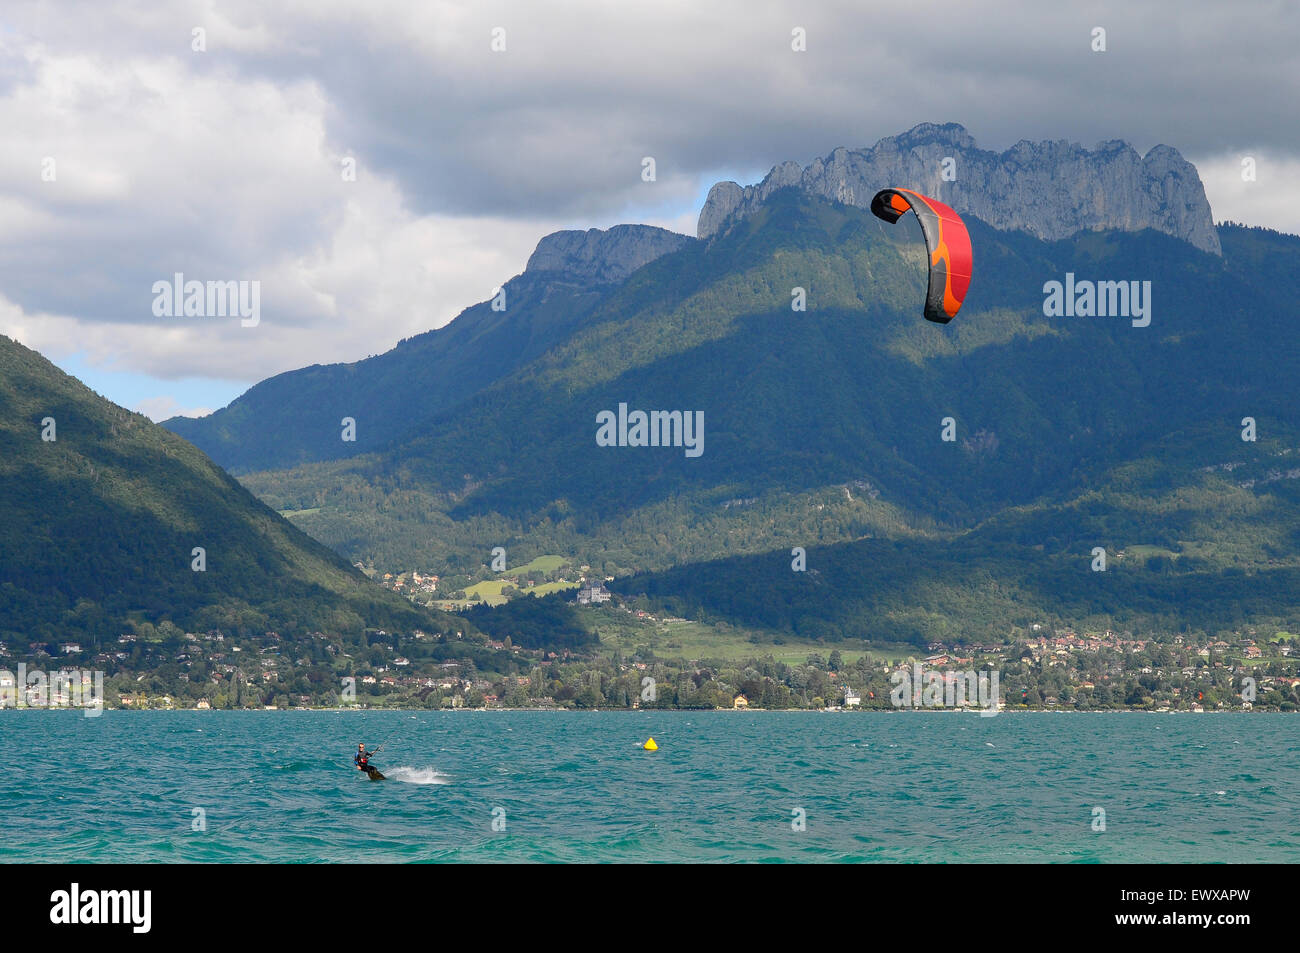 Man kitesurfing and red Kitesurf on Annecy lake in France with Forclaz mountain Stock Photo